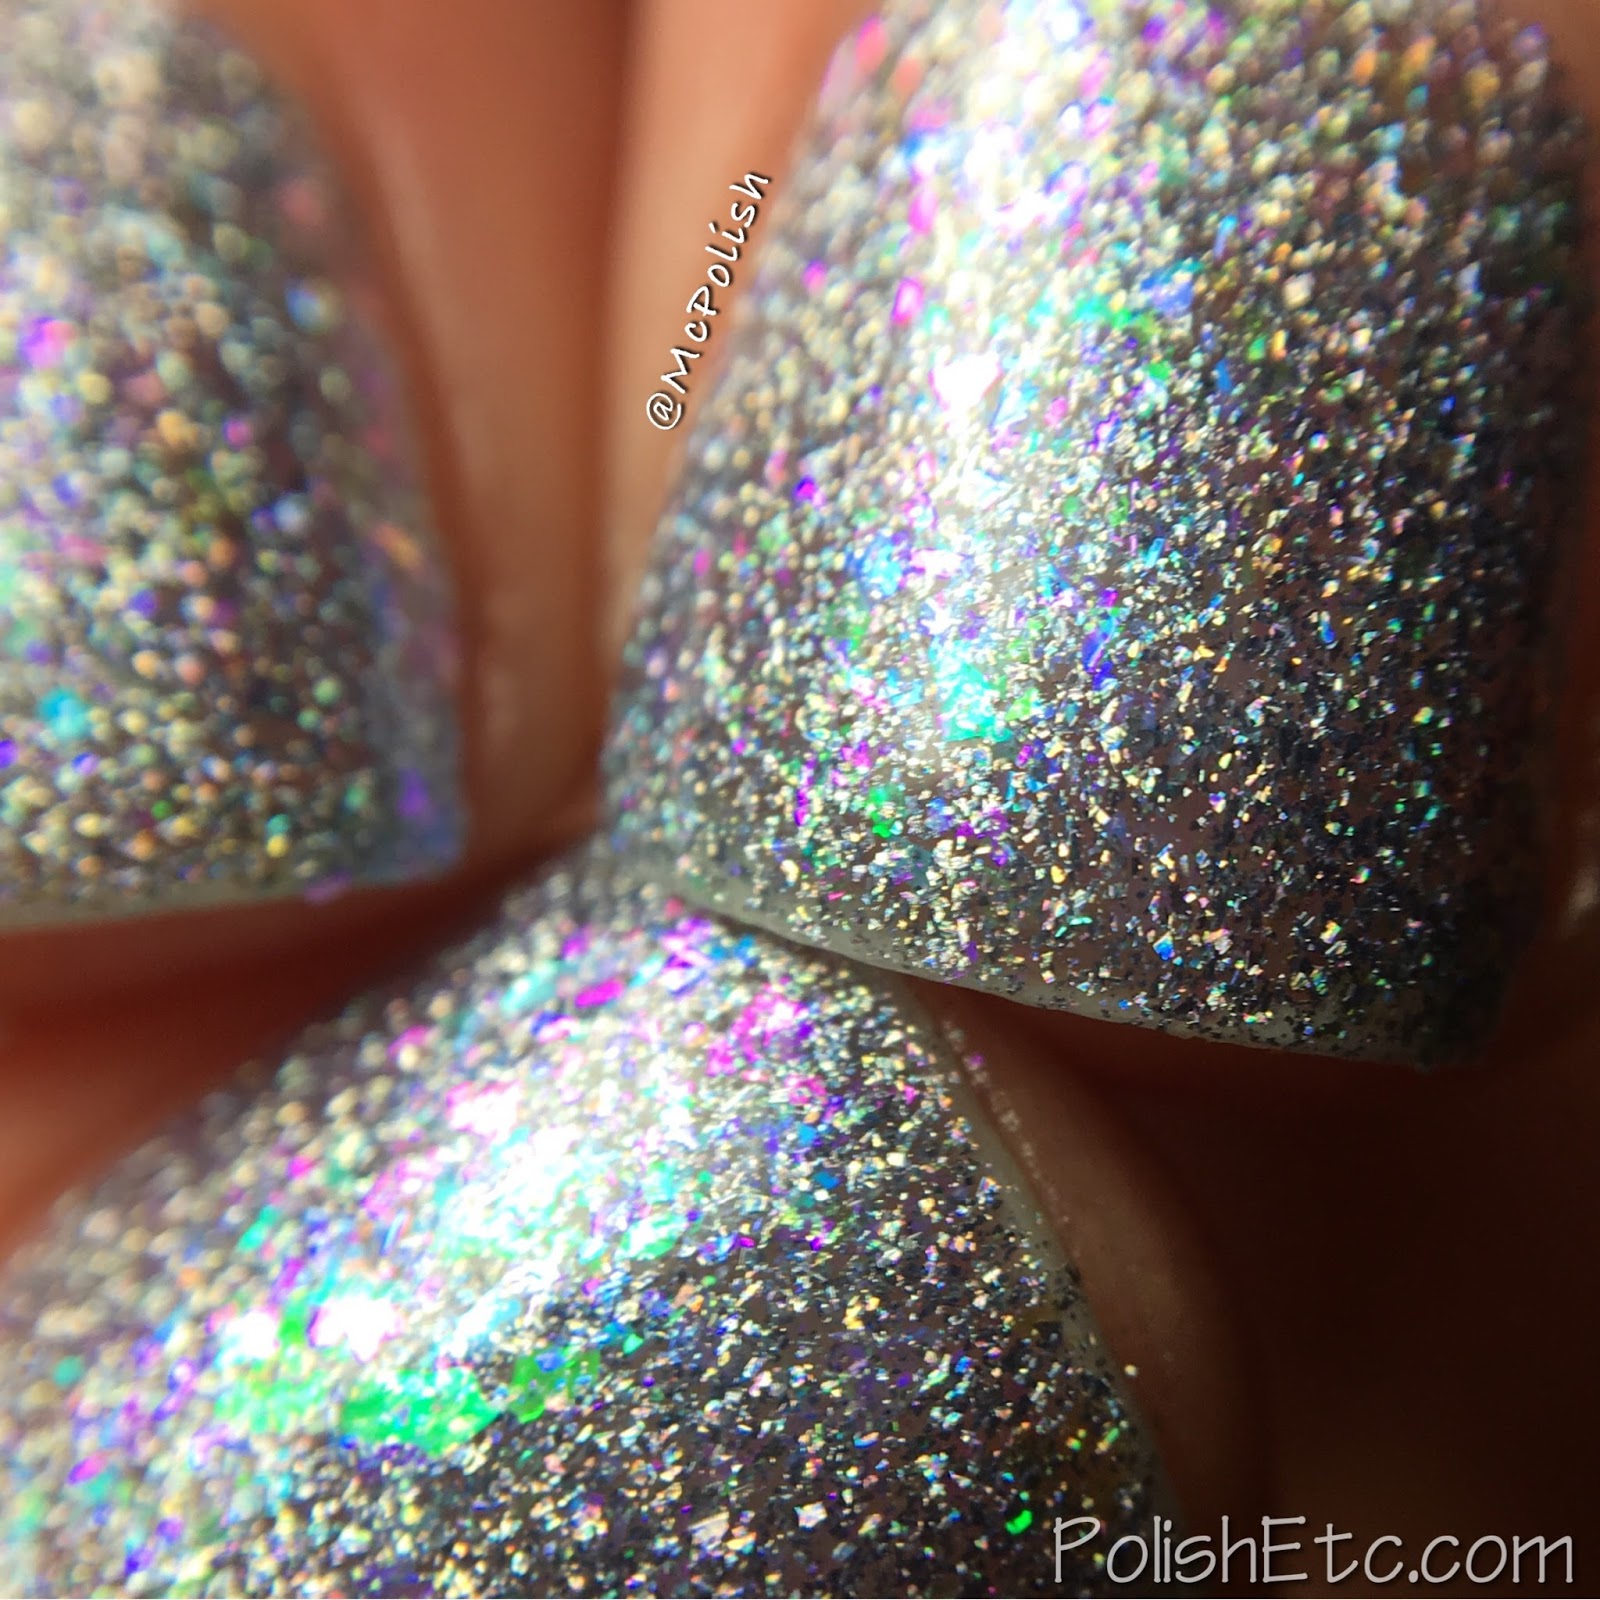 Road to Polish Con - Week 1 - McPolish - Polish Your Crystal Ball by Great Lakes Lacquer